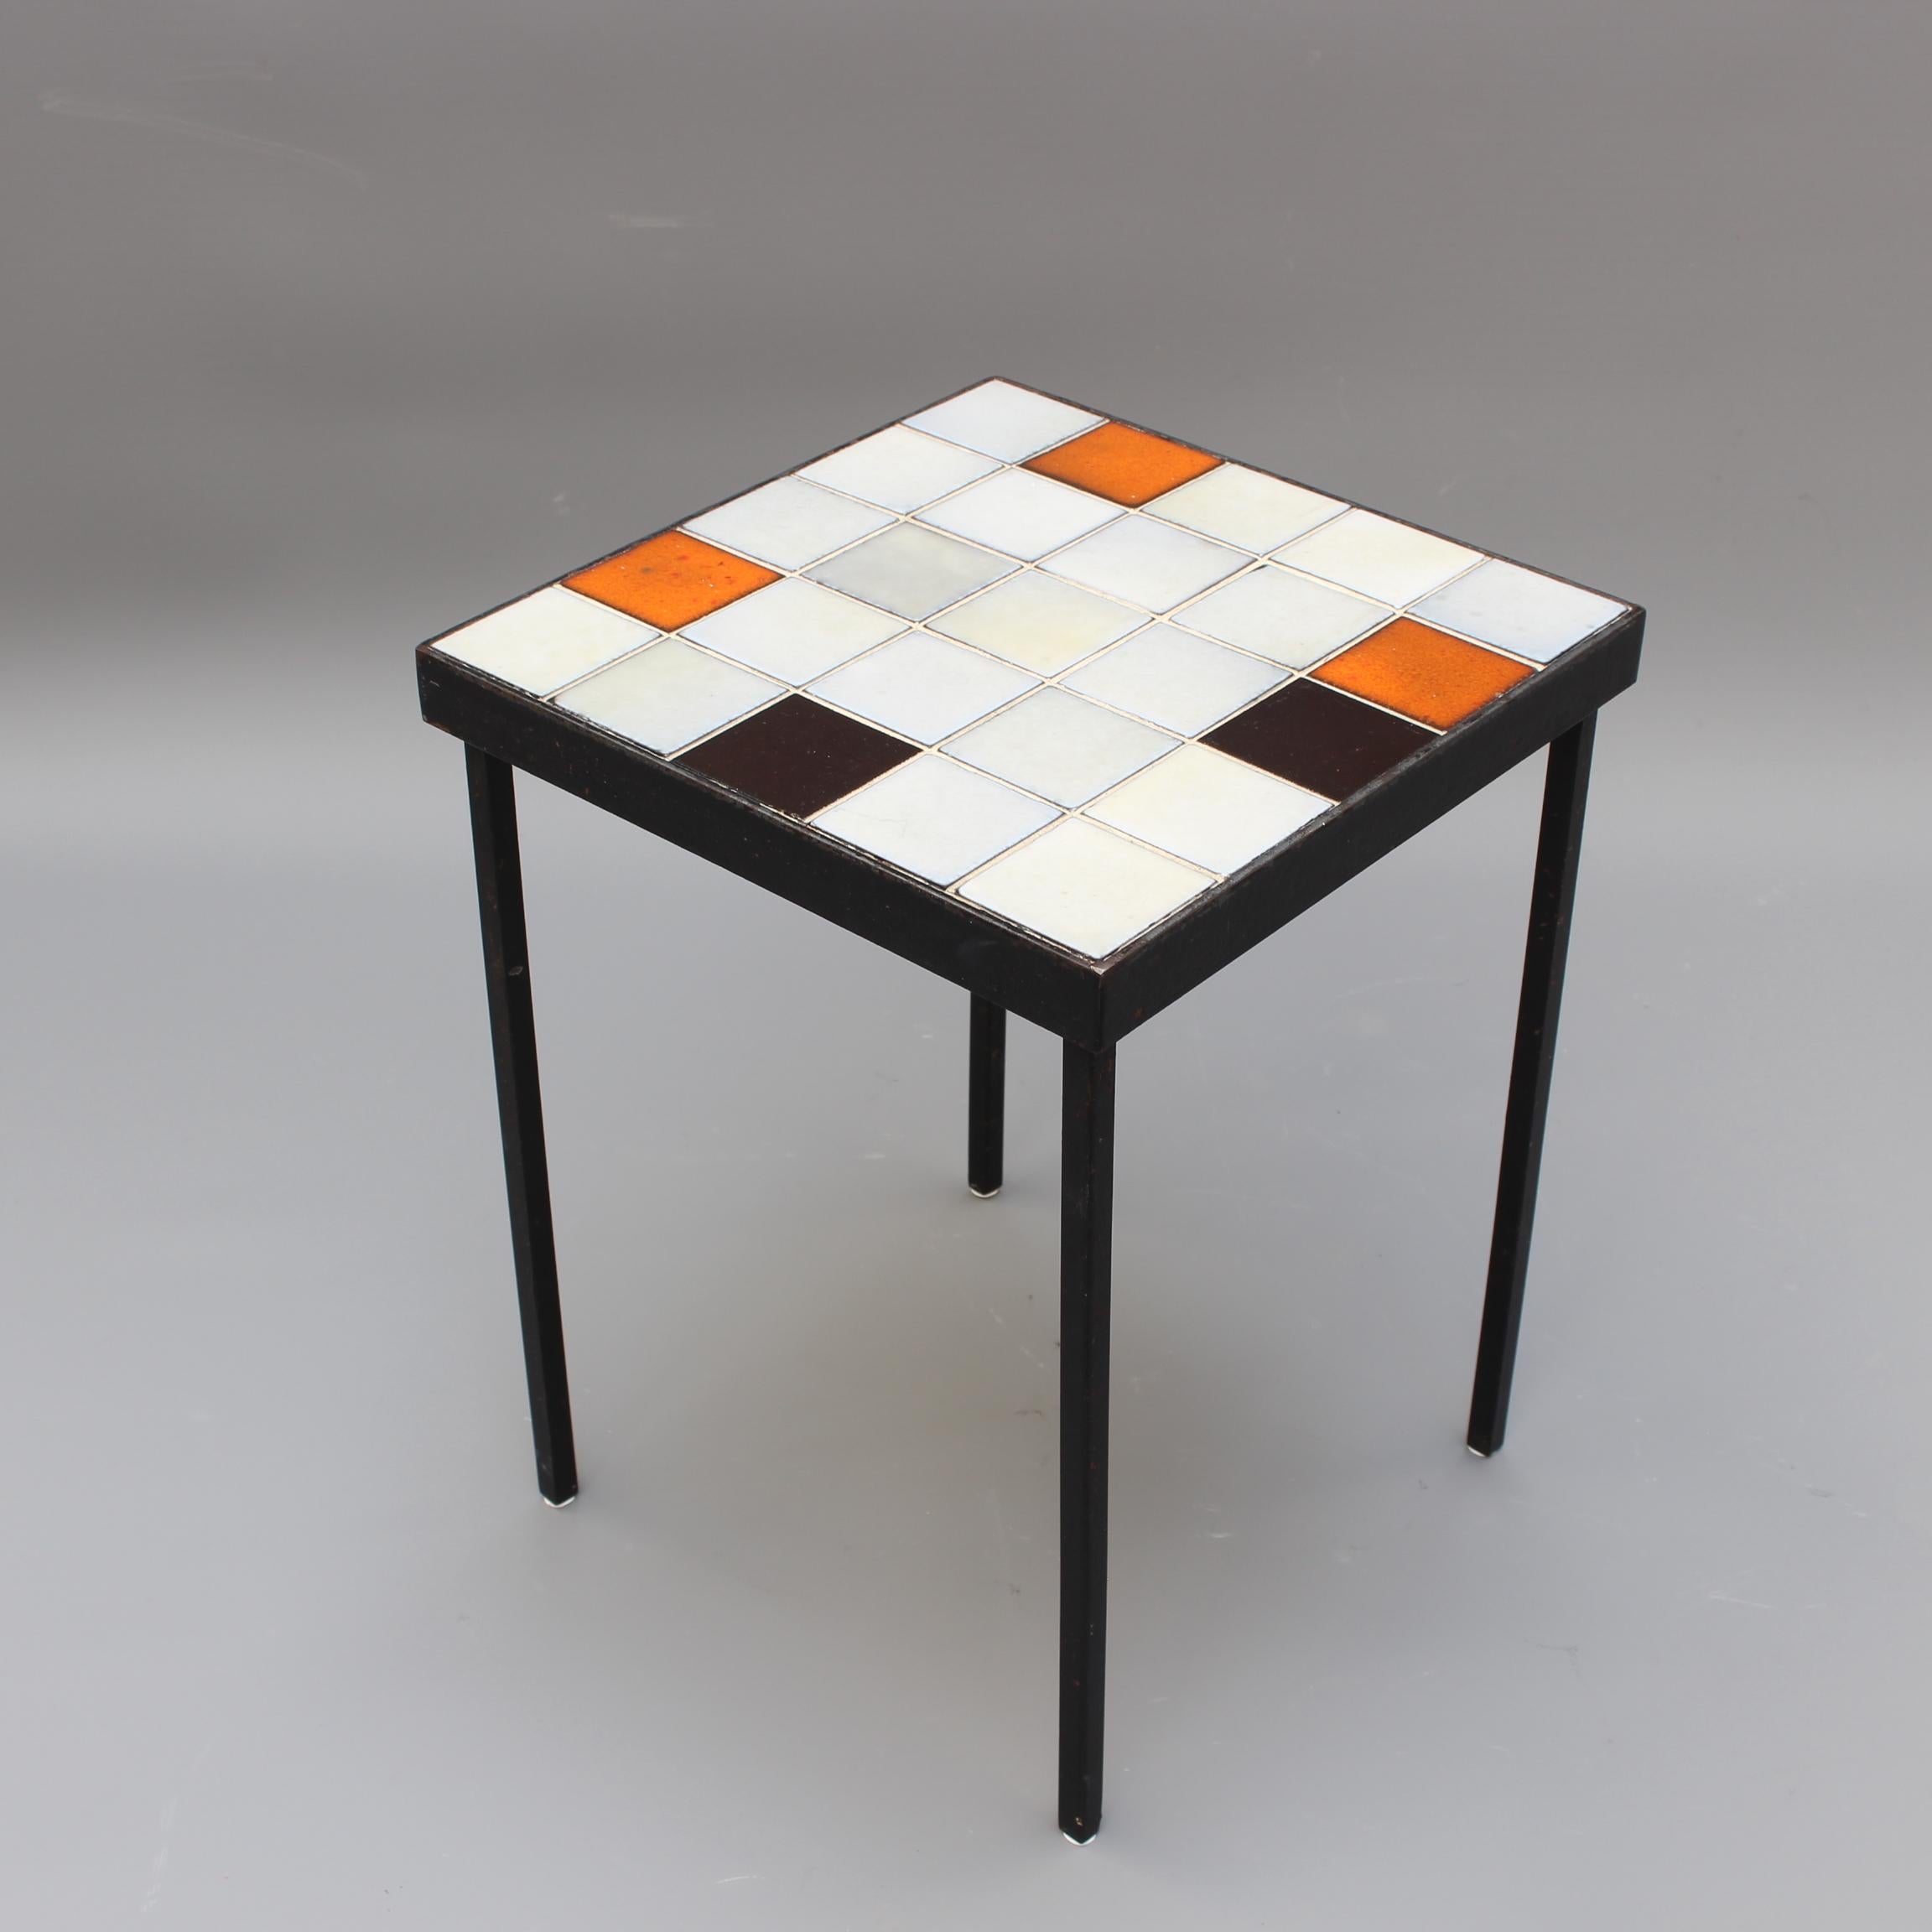 Small side table perfectly simple and simply perfect by Mado Jolain (circa 1950s). Ceramic tiles sit upon a frame and black metal legs in elegant symmetry. The tiles are an eclectic mix of off-whites, black and orange. The end result is a harmonious